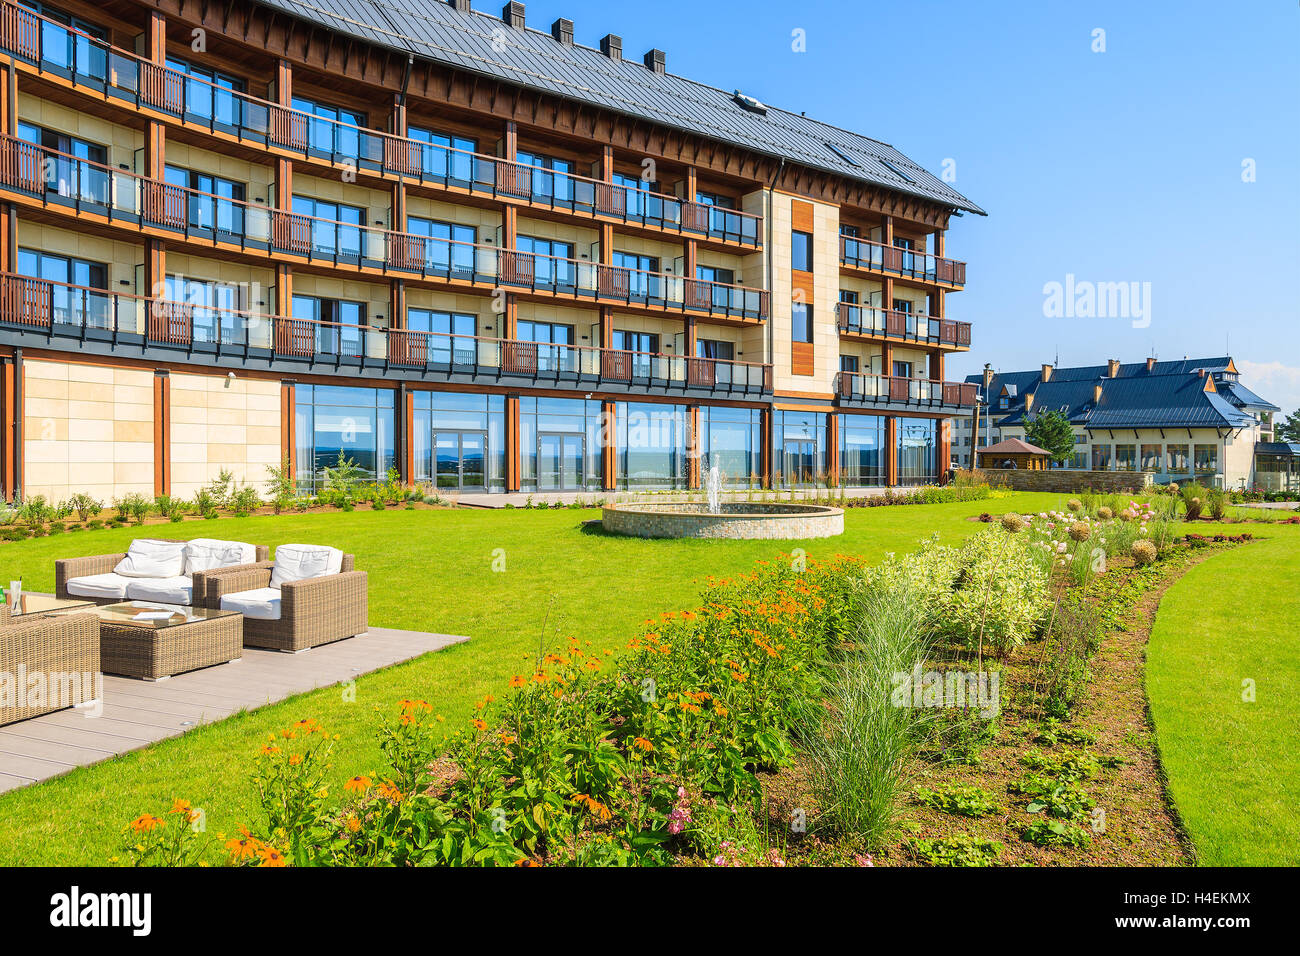 ARLAMOW HOTEL, POLAND - AUG 3, 2014: green garden in Arlamow Hotel. This luxury resort was owned by Poland's government and is located in Bieszczady Mountains. Stock Photo